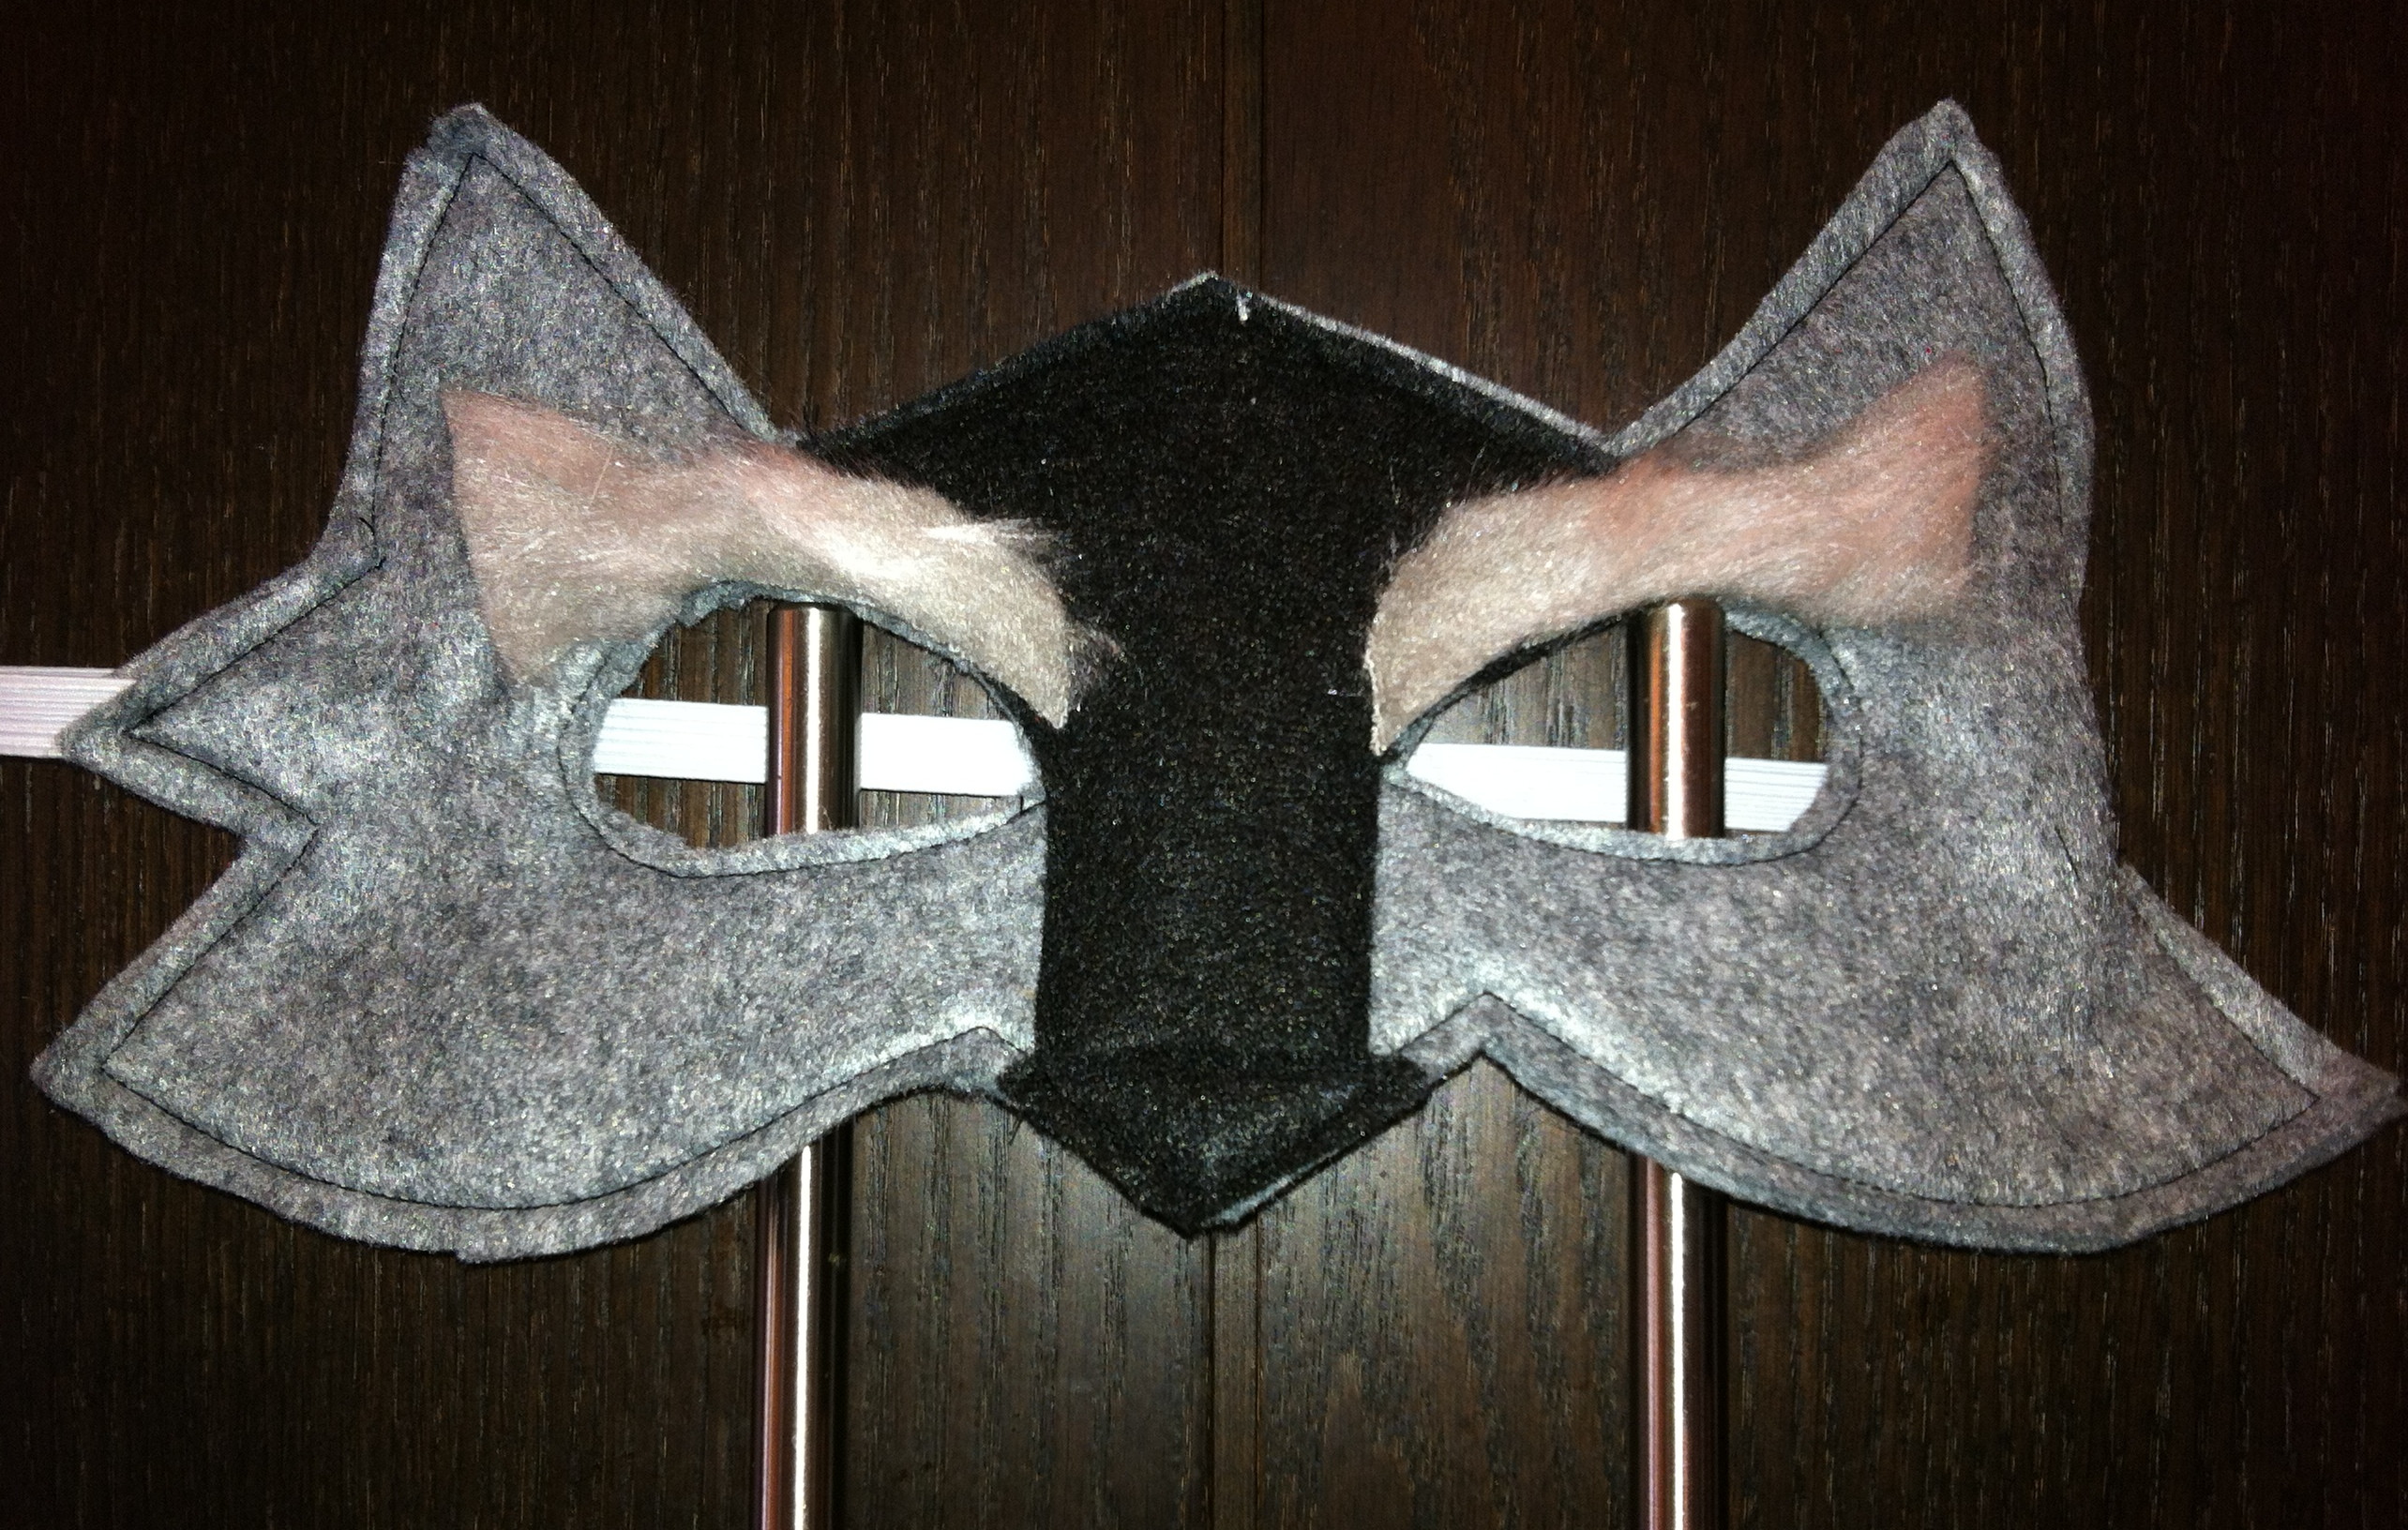 DIY Wolf Mask
 Howl at The Moon Easy & Inexpensive DIY Wolf Mask and